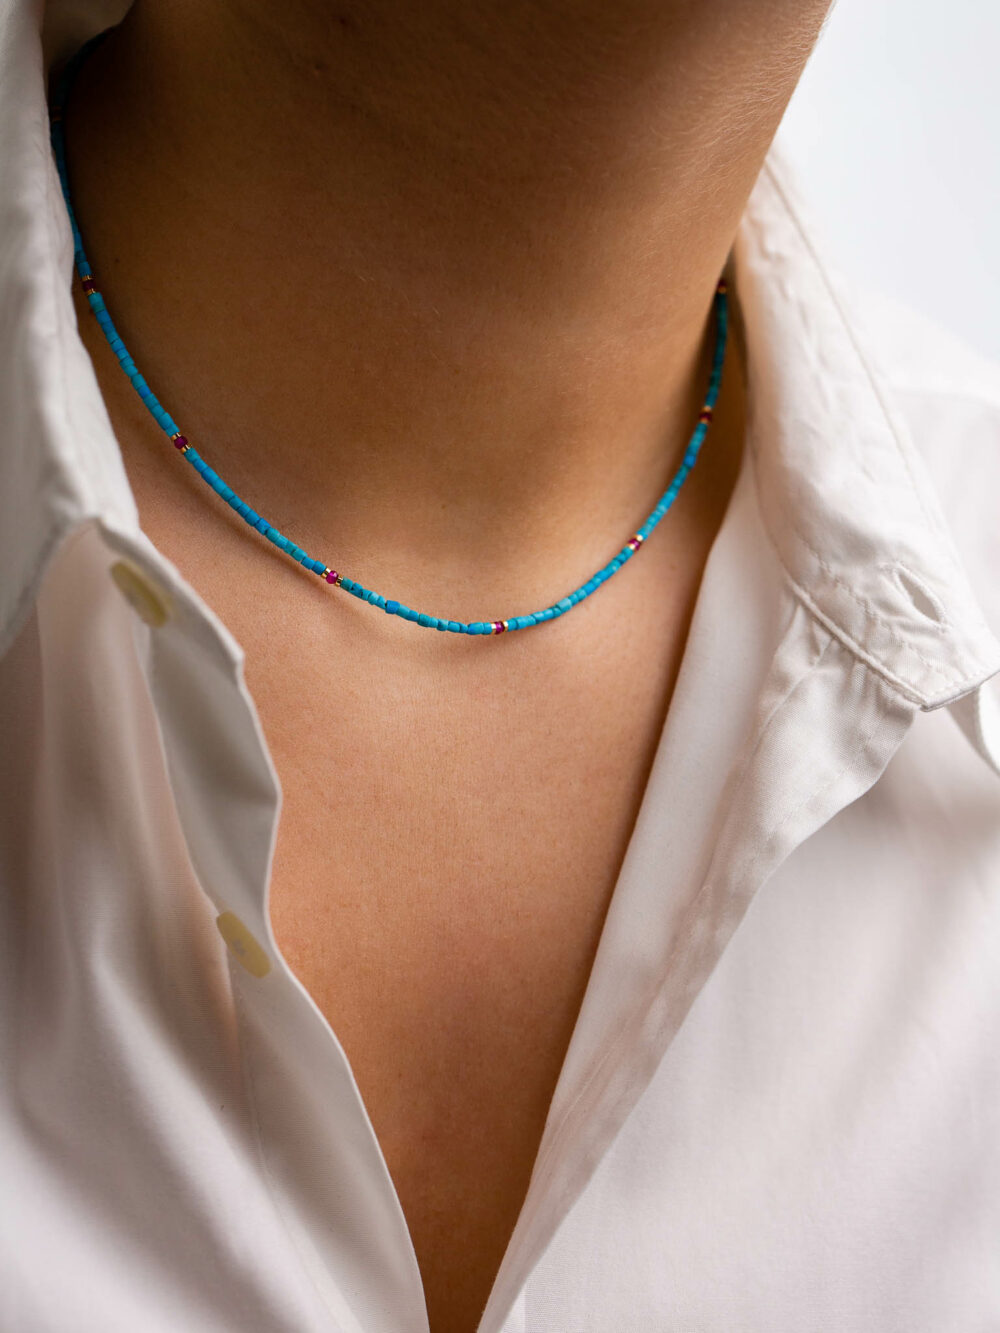 ELISE Turquoise and Rubylite necklace.